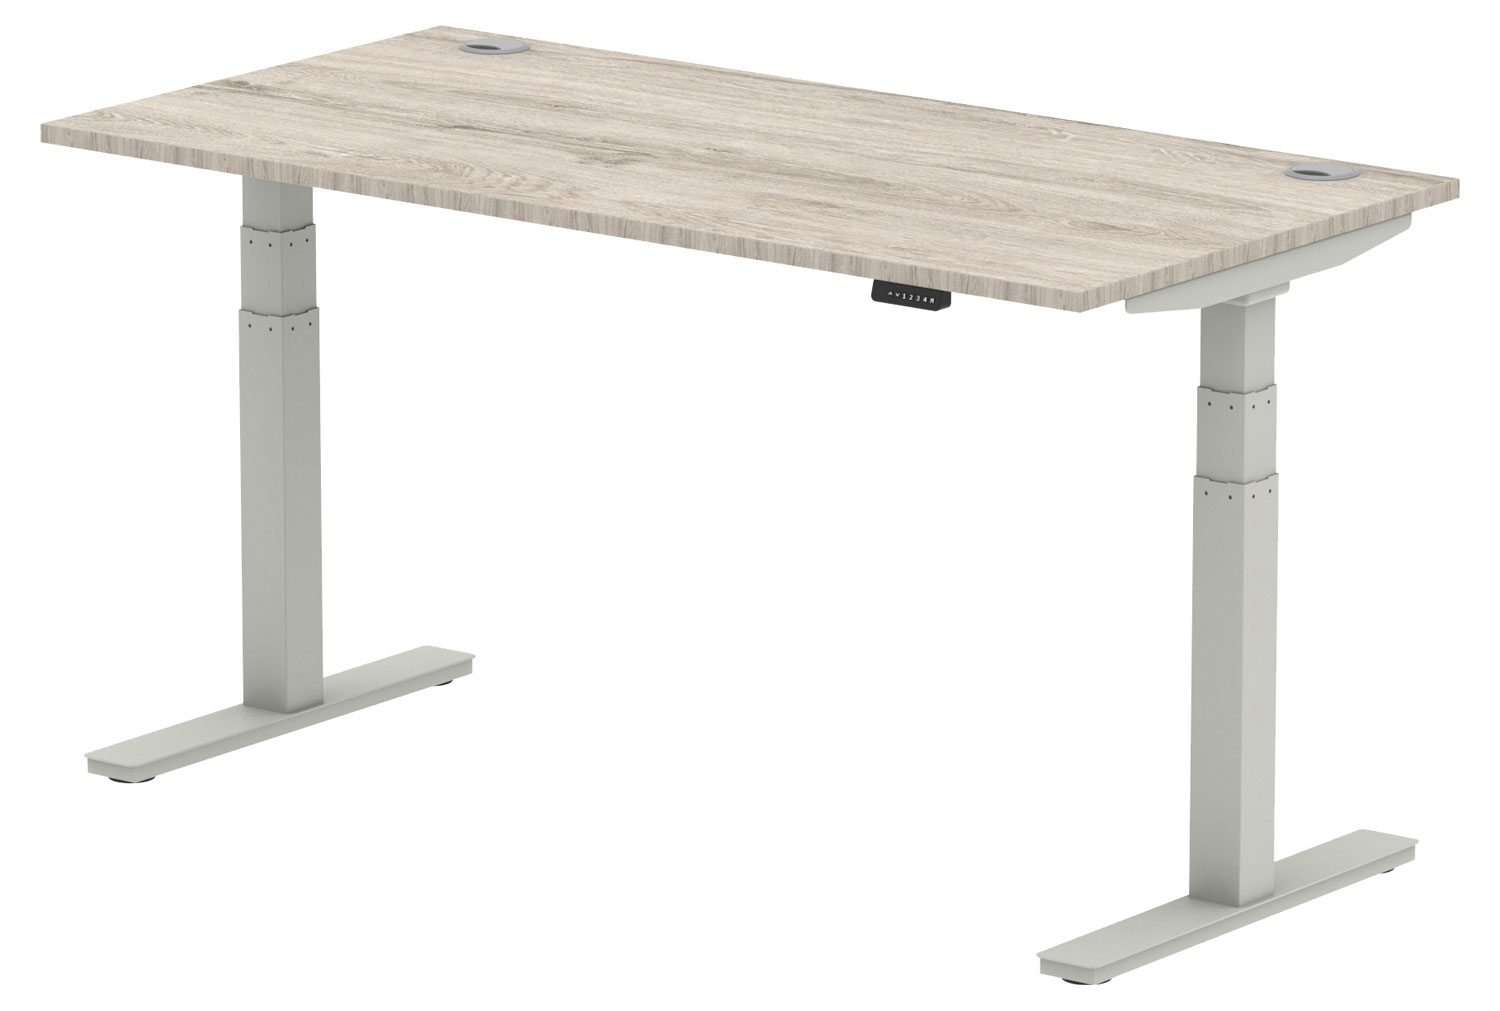 Vitali Sit & Stand Rectangular Office Desk (Silver Legs), 160wx80dx66/130h (cm), Grey Oak, Express Delivery